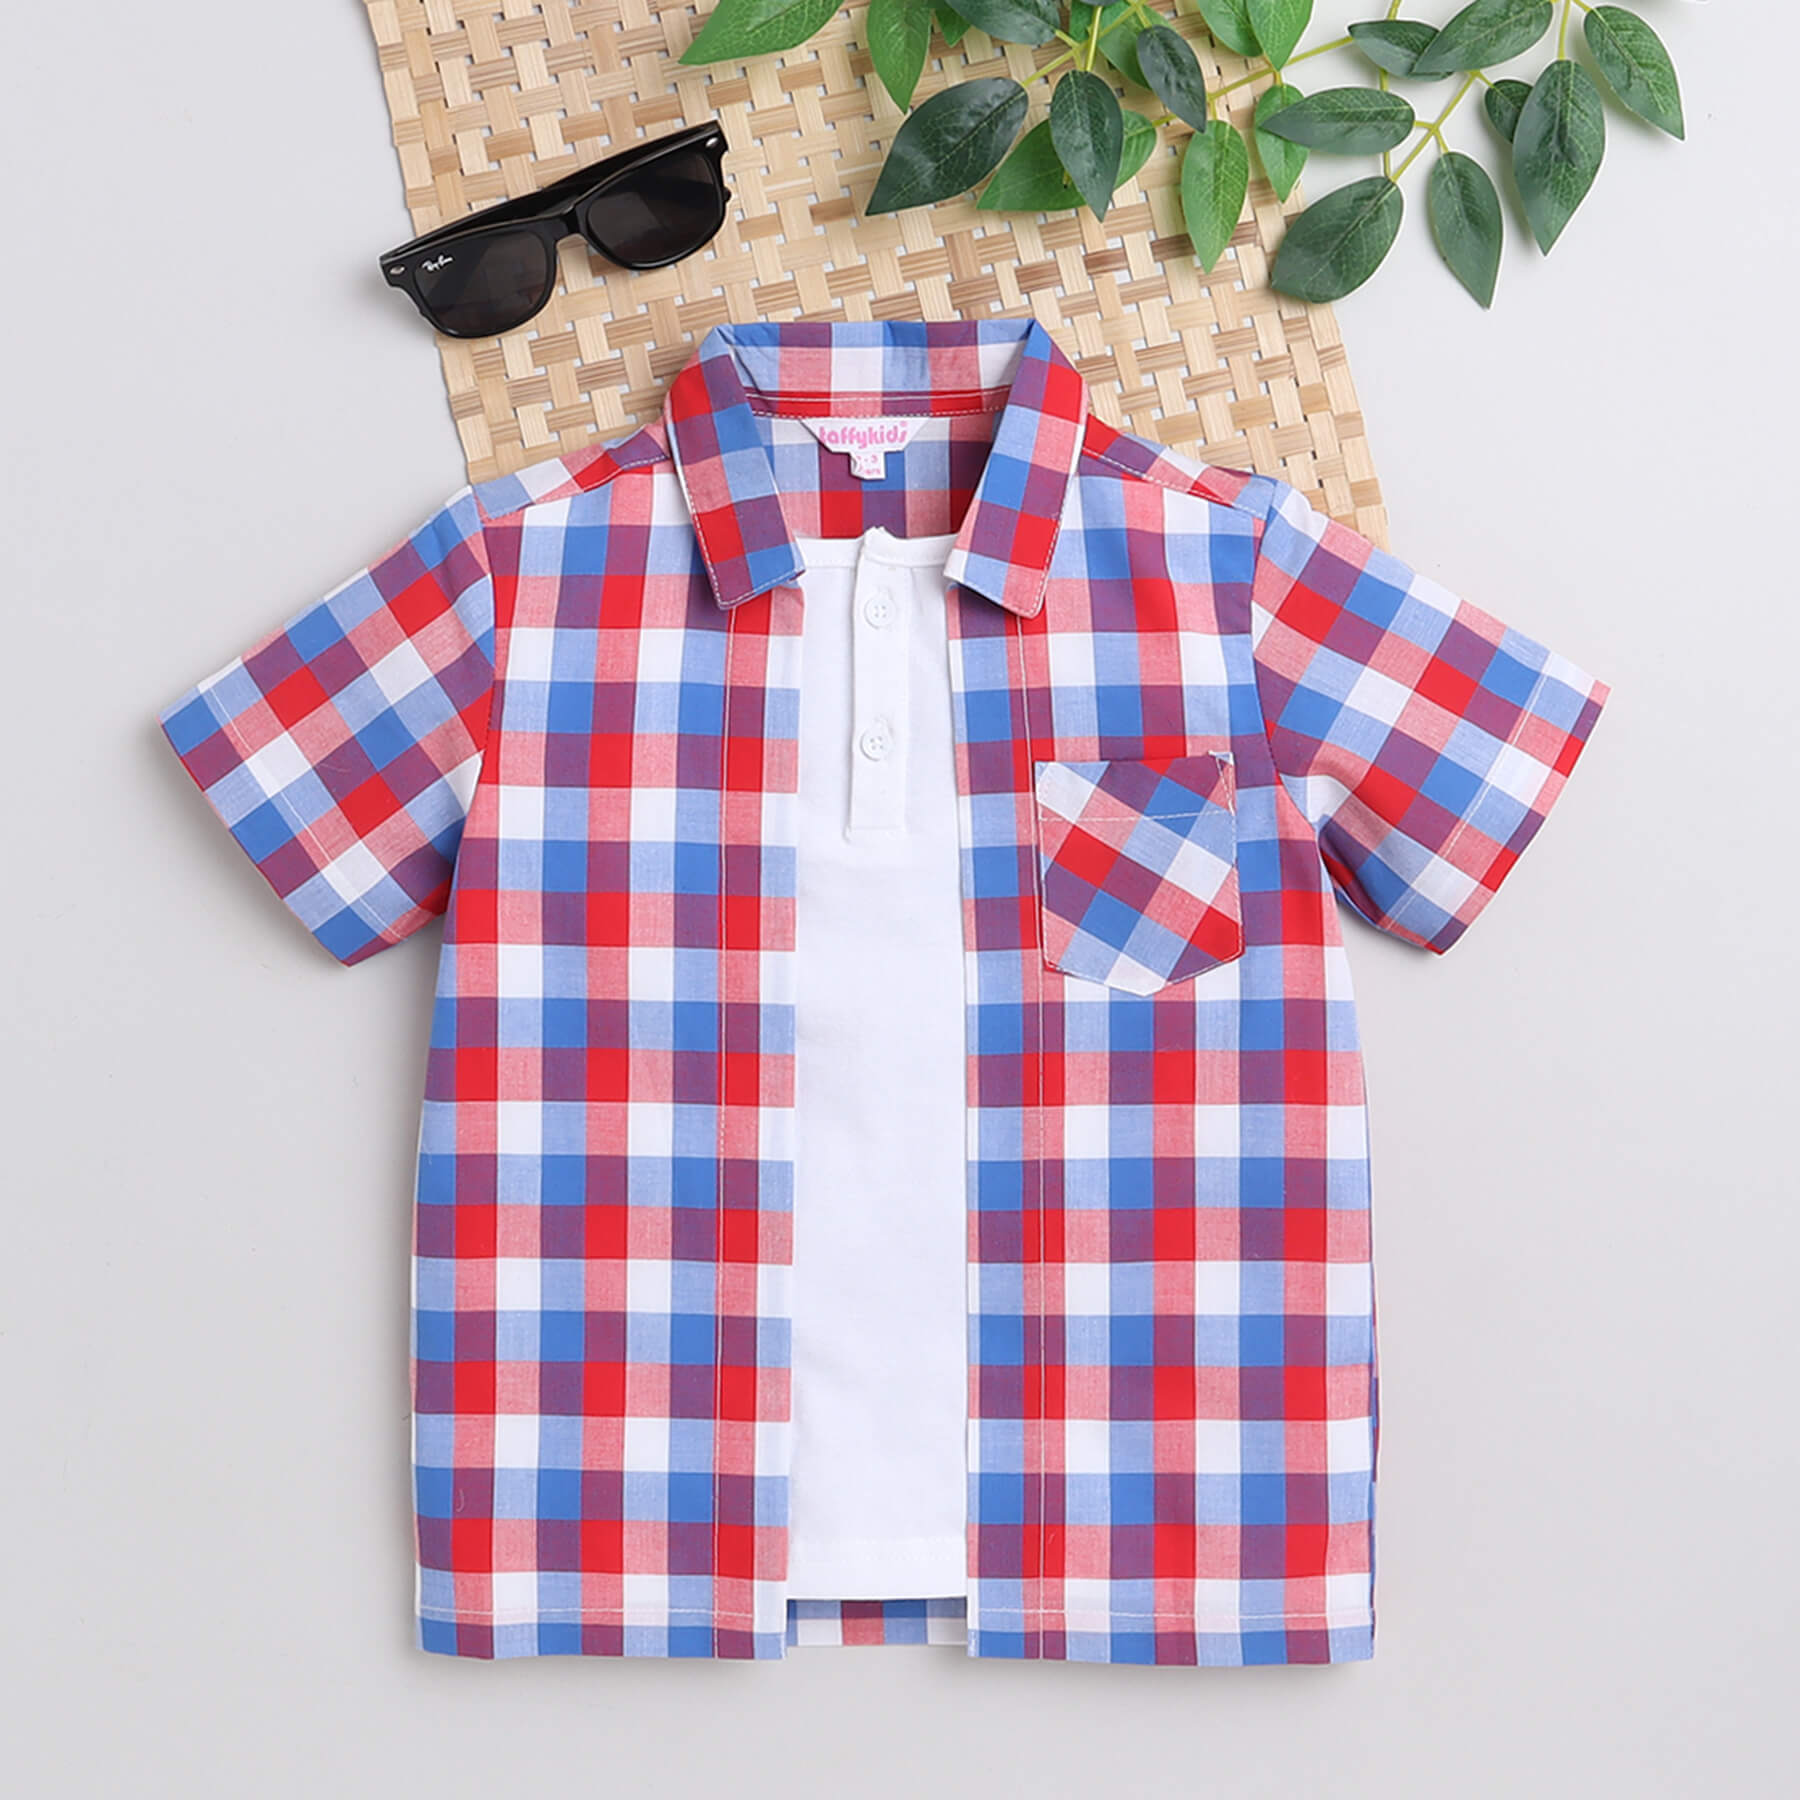 Taffykids checks half sleeves shirt with attached tee - Multi